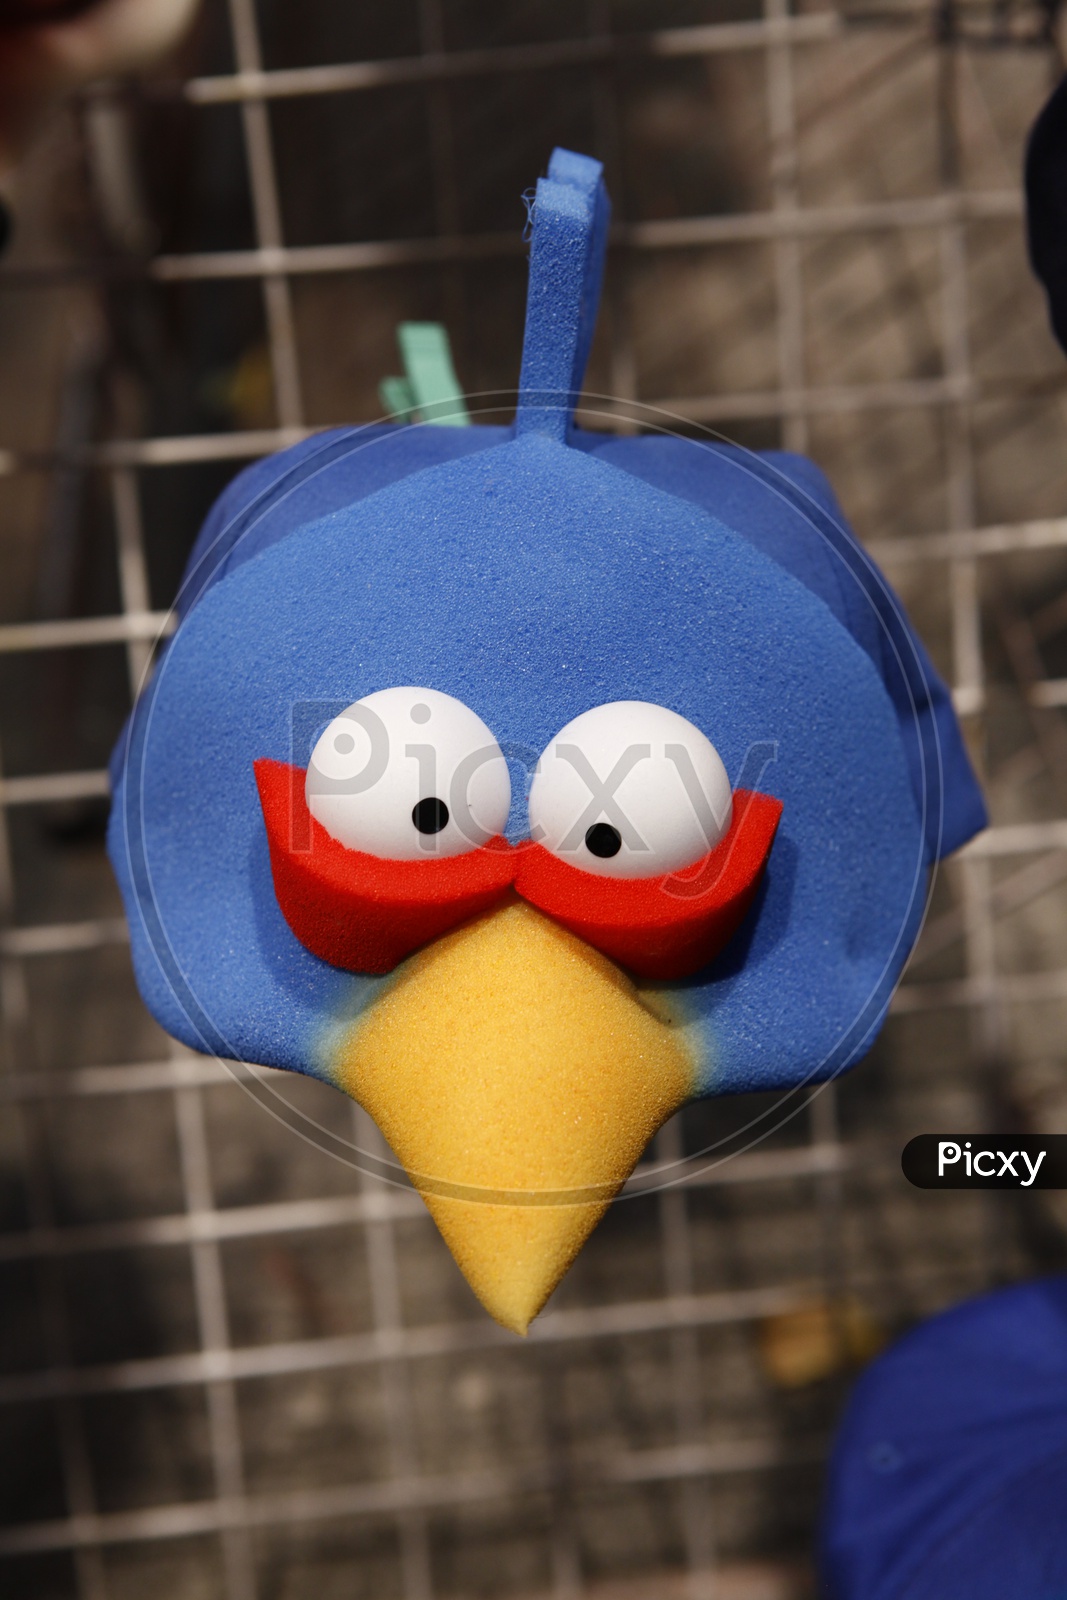 Face of an angry bird toy